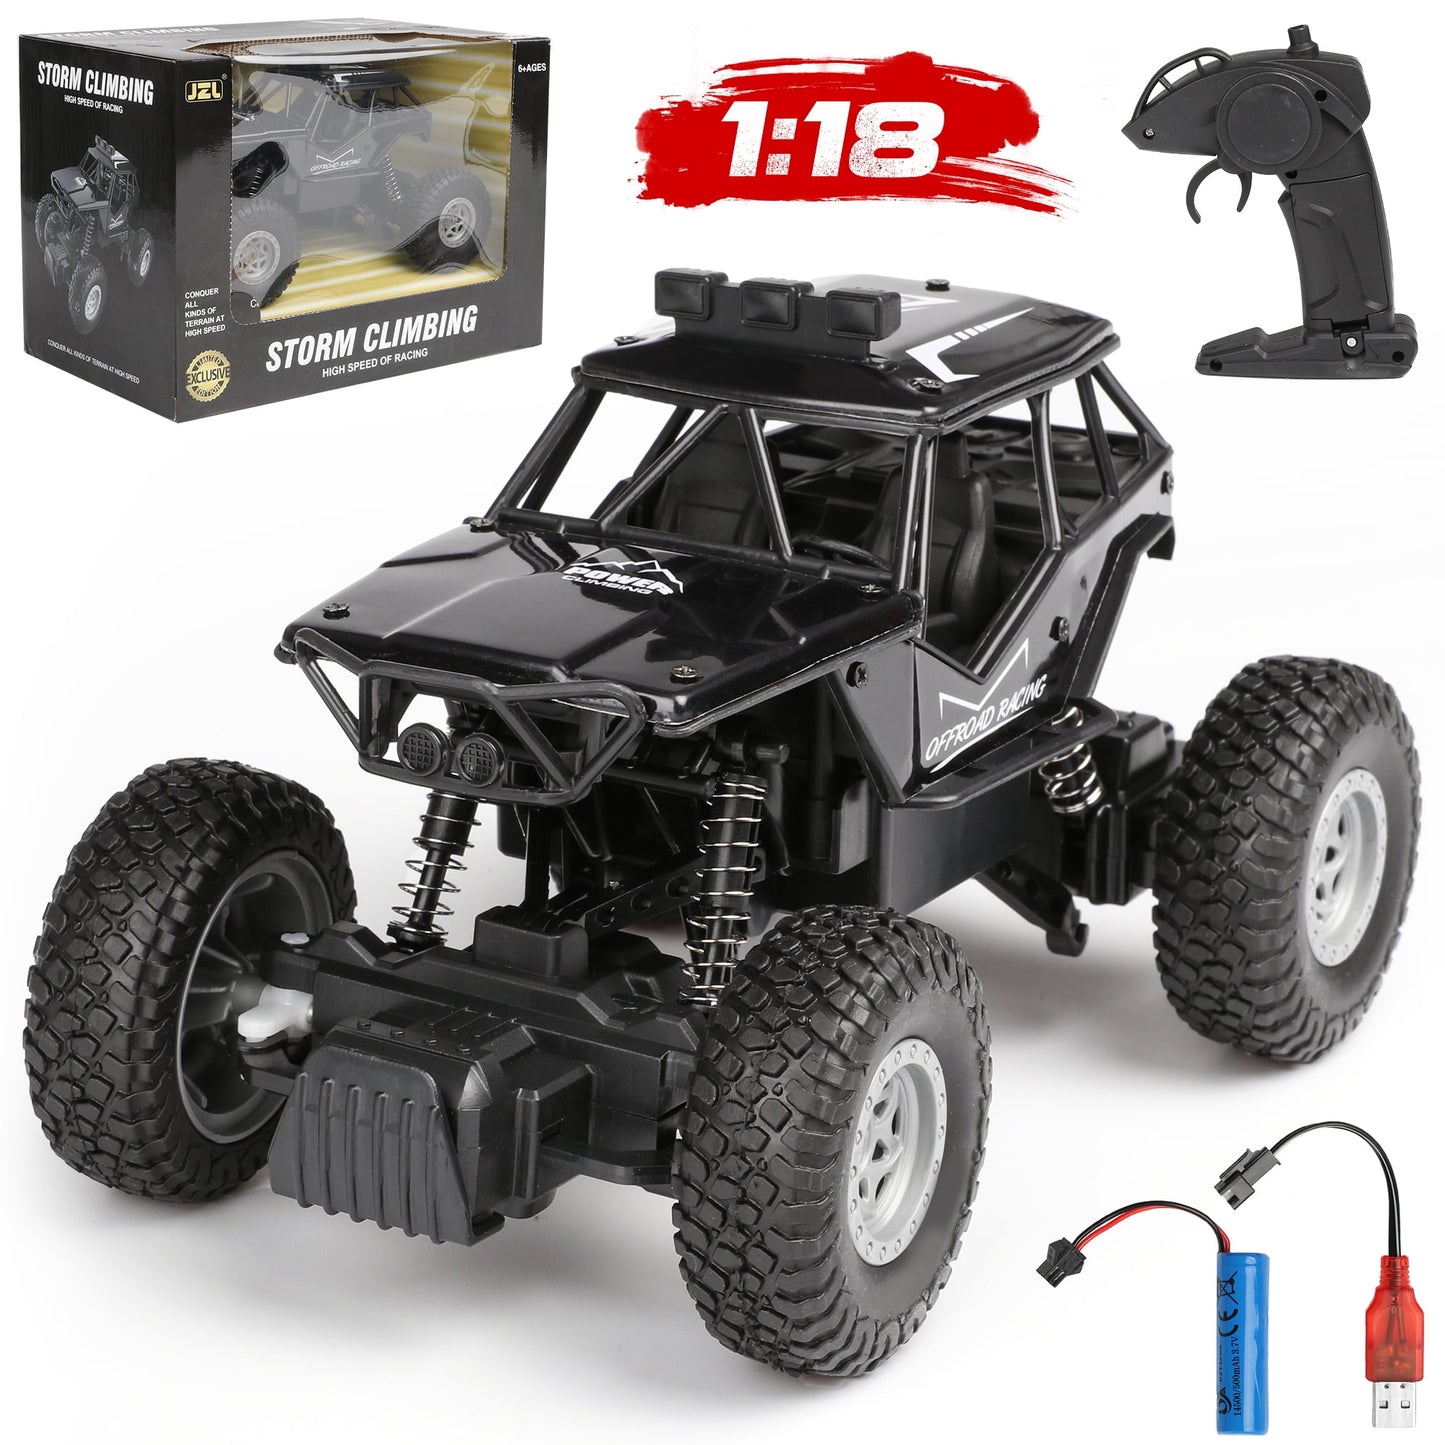 Remote Control Cars 1/18 Scale, Race Car Toys for Boys Kids 6-12 Years Old, High Speed 20-40KM/H Electric All Terrain Off-Road Monster Truck.（Black）